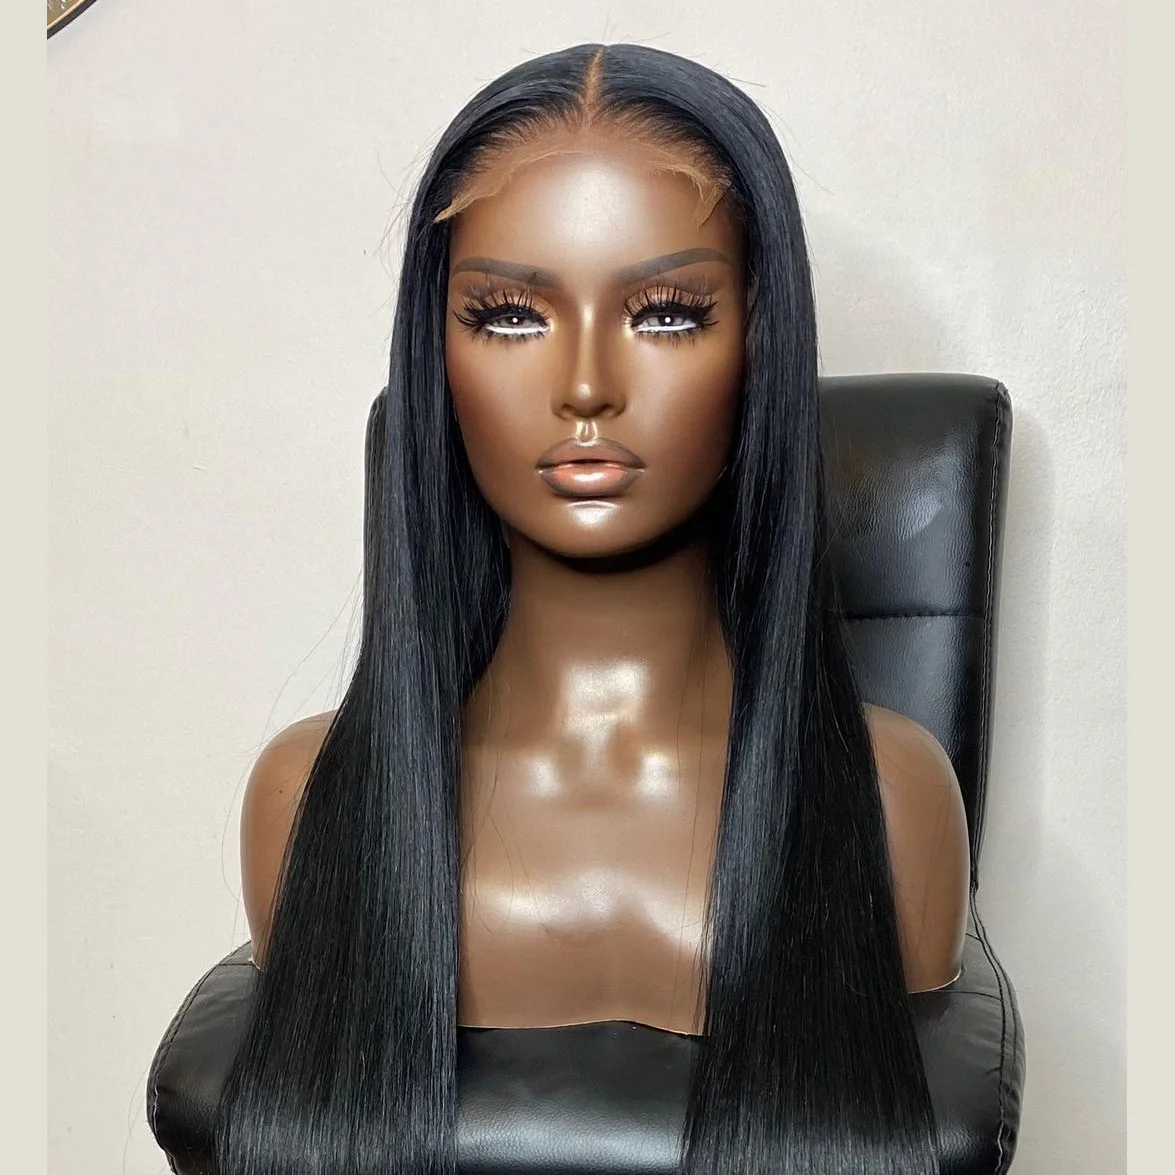 

Overnight delivery cuticle aligned lace frontal wig straight 13x4 lace frontal wig pre plucked for black women